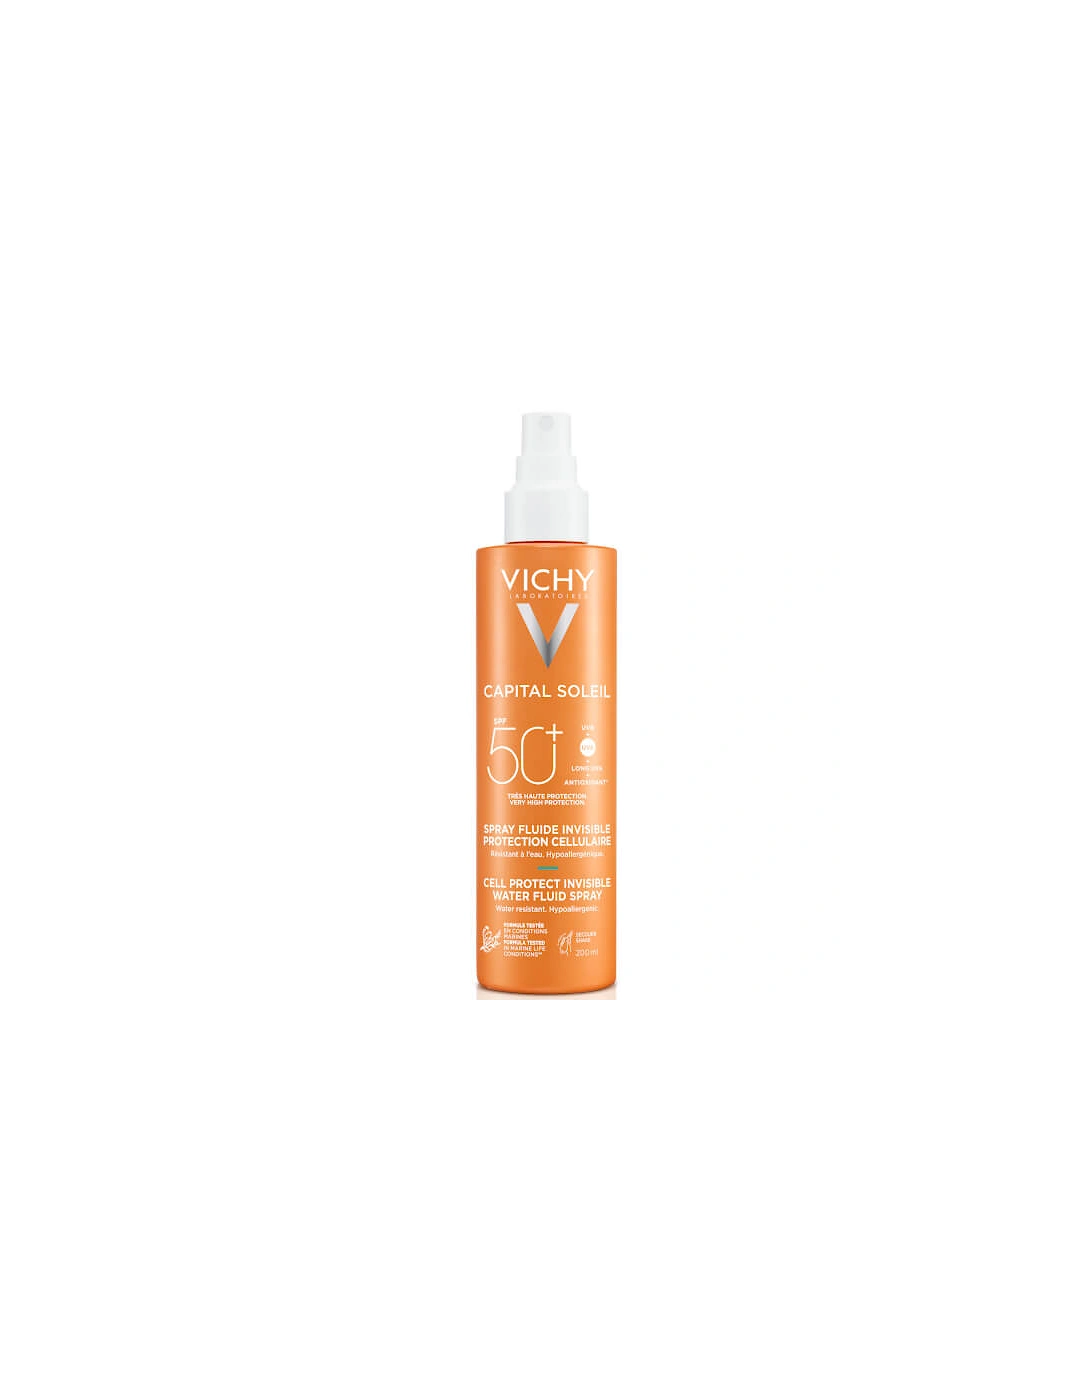 Capital Soleil Cell Protect Invisible High UVA and UVB Sun Protection Spray SPF50+ 200ml, 2 of 1